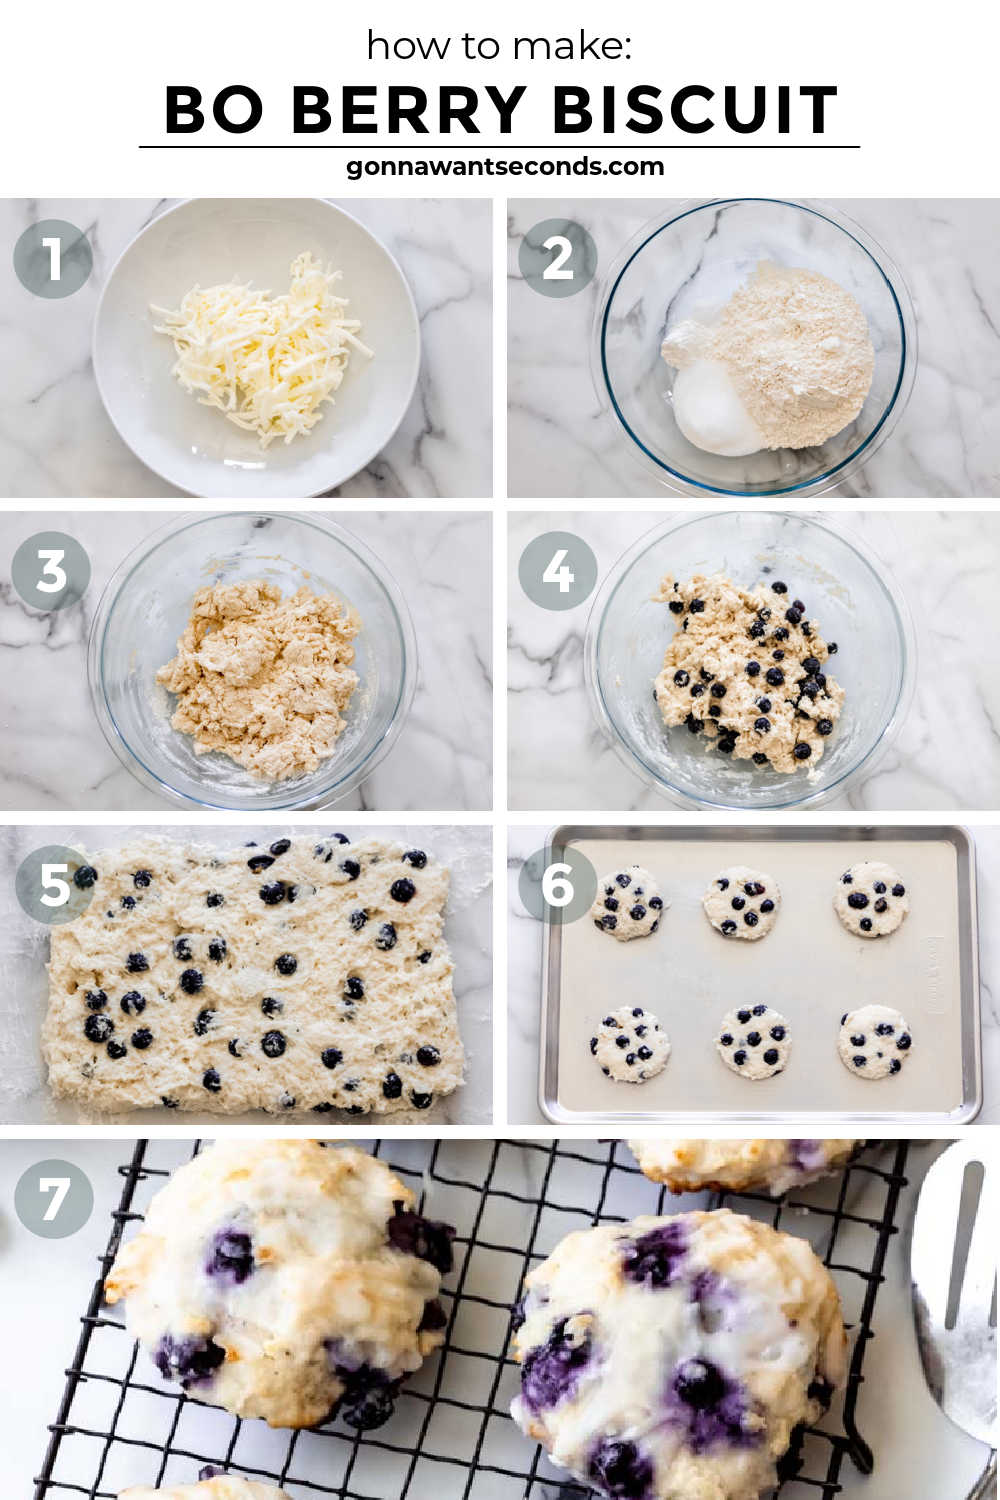 Step by step how to make Bo Berry Biscuit